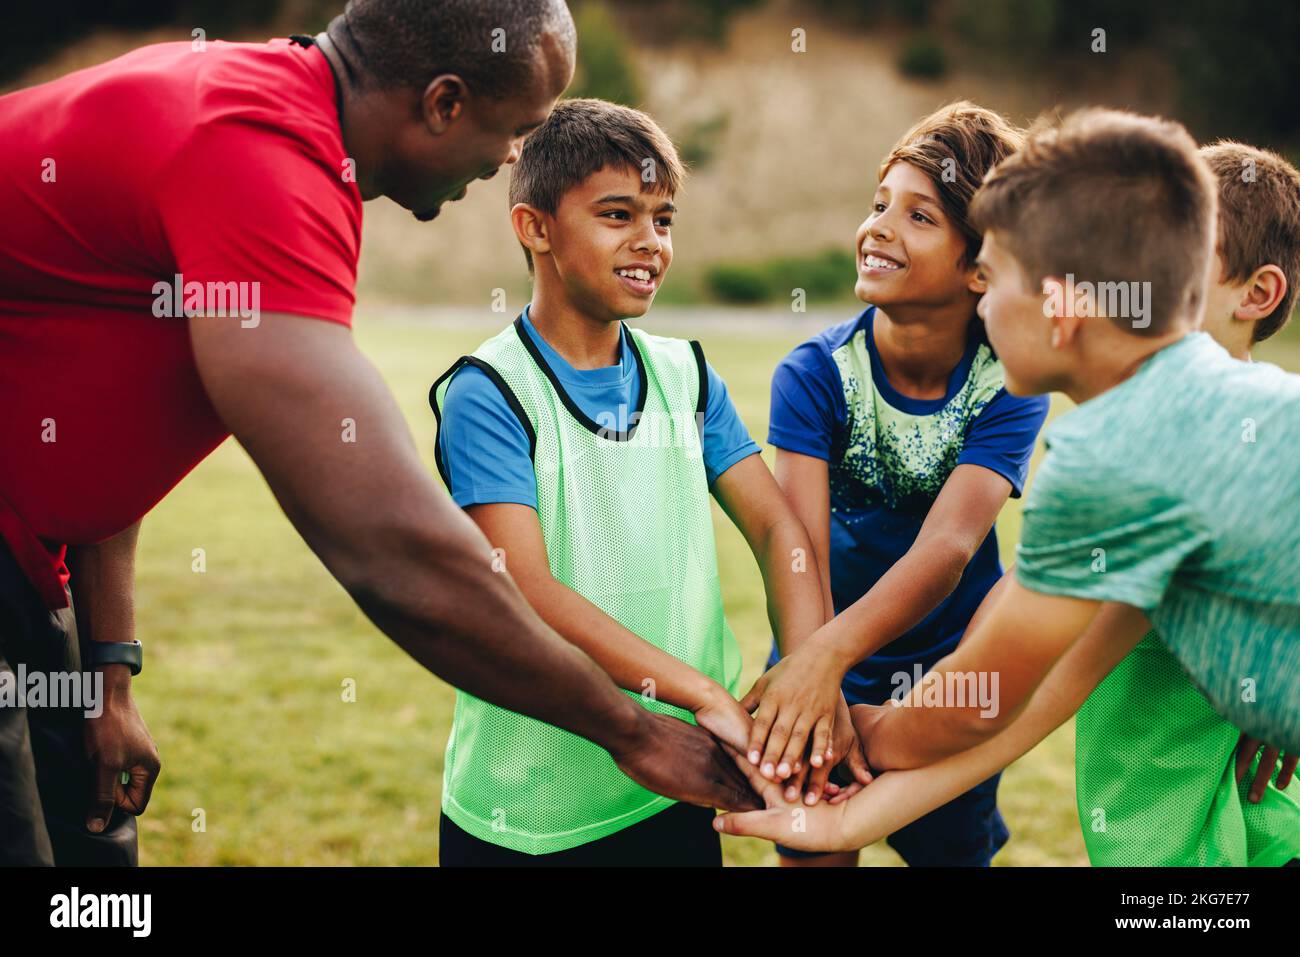 Sports trainer having a huddle with his team in a school field. Rugby coach giving his students a motivational talk before practice. Sports mentorship Stock Photo